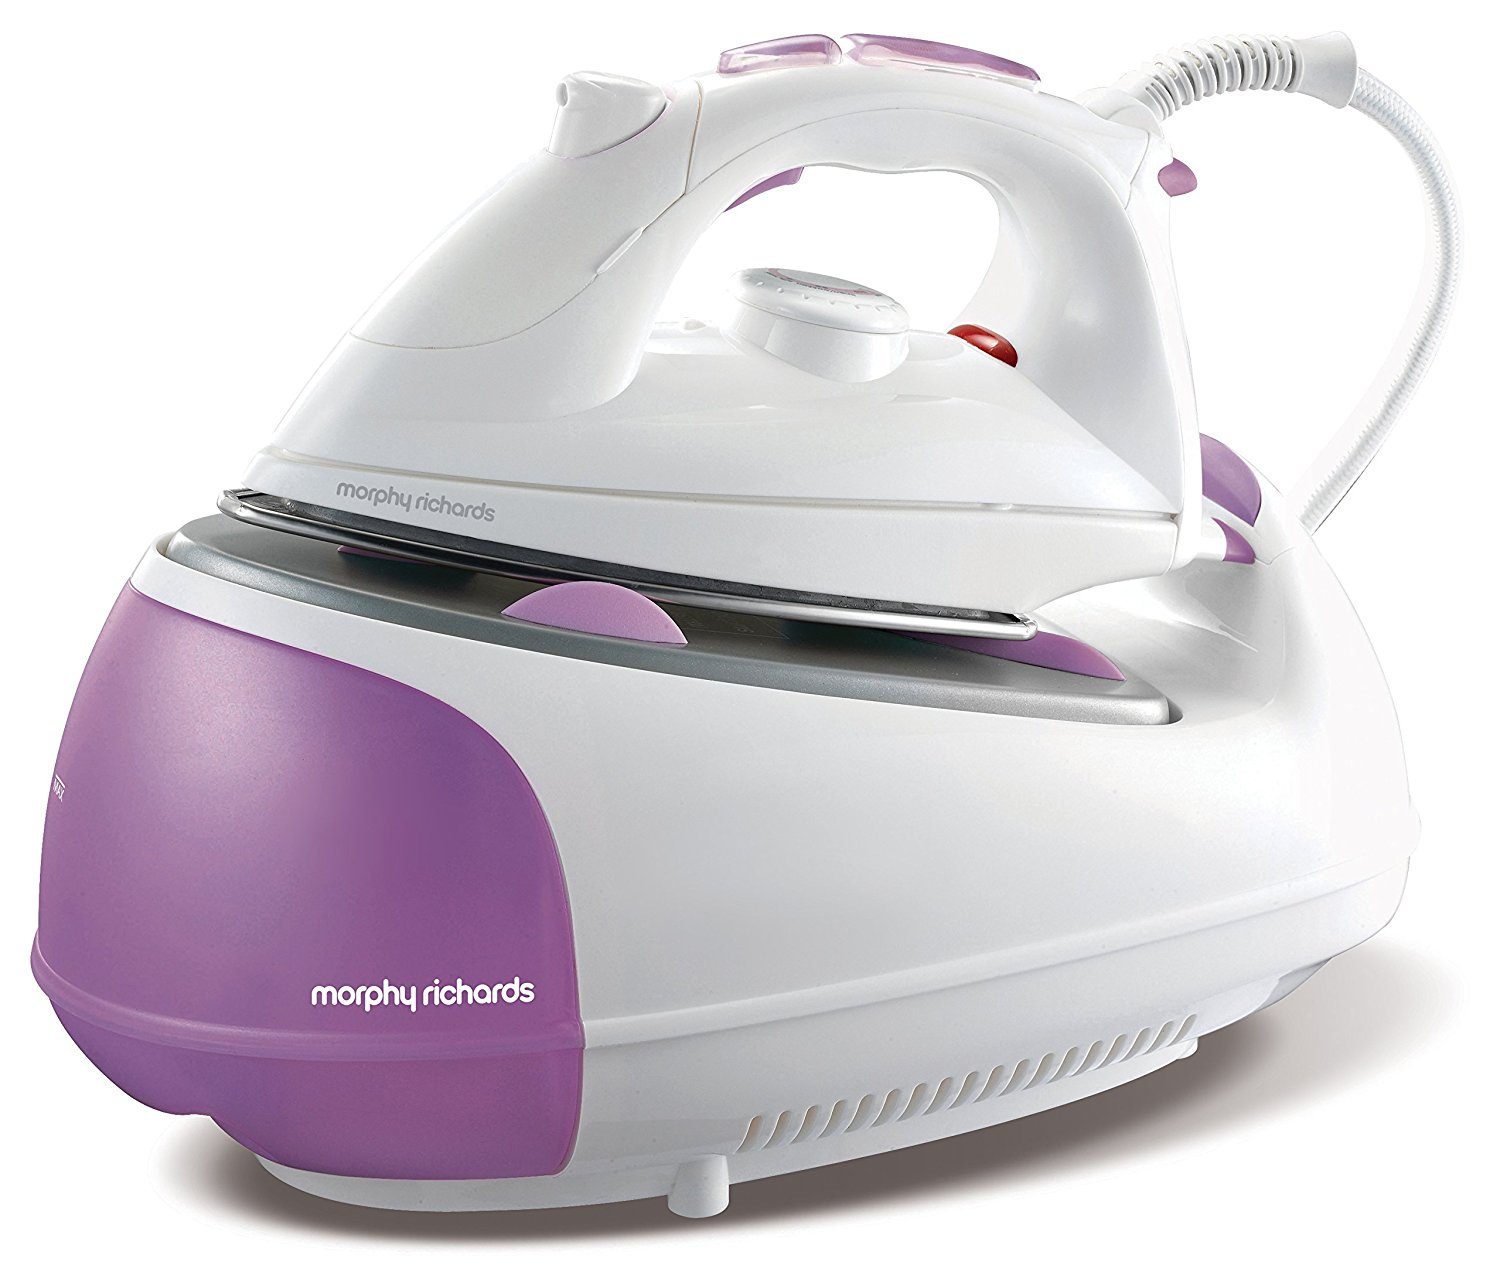 Morphy Richards 333020 Jet Steam Generator Review